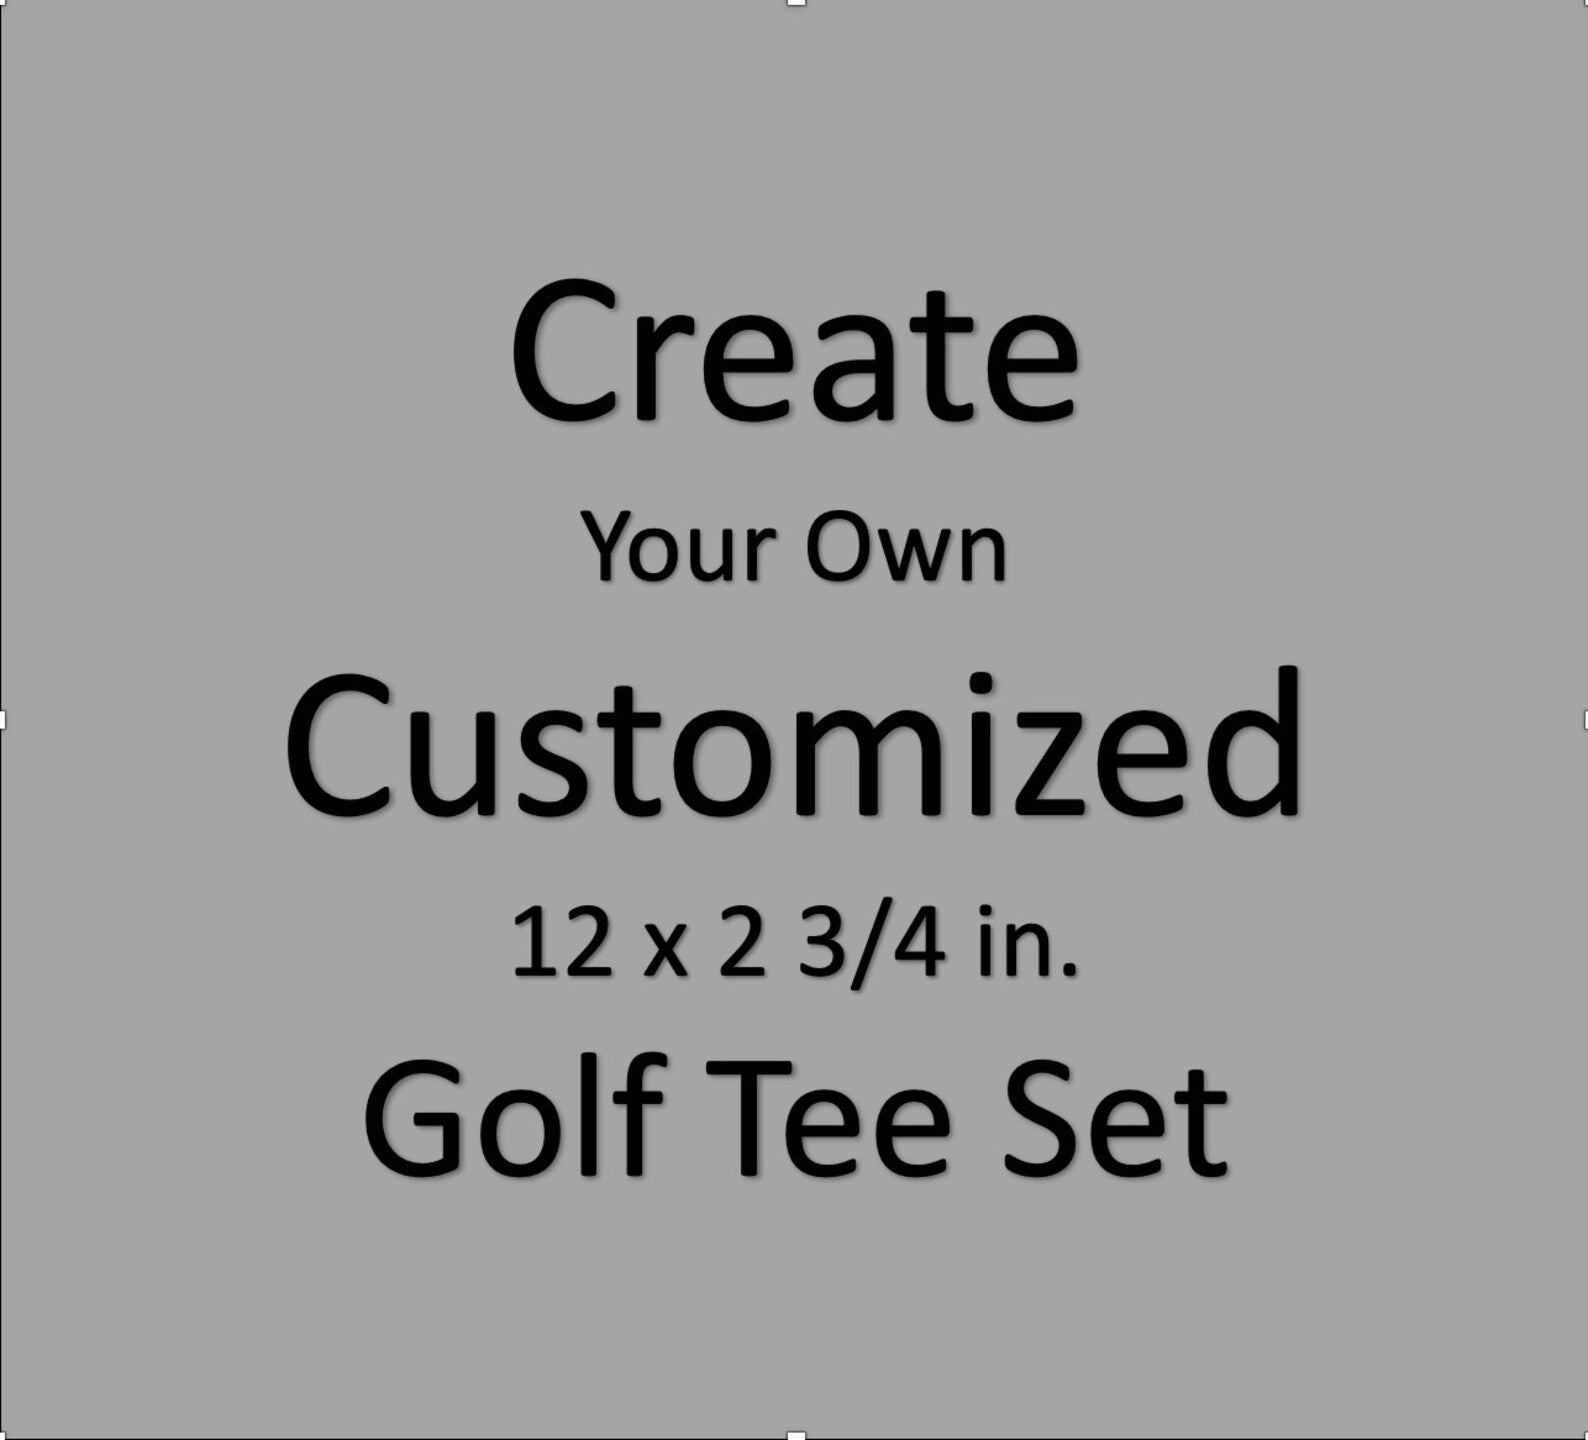 12 - 2 3/4 in. Customize Golf Tee Set, Alternative 2 Business Cards, Golfing Event, Marketing, Trade show, Groomsman gift, Pouch included